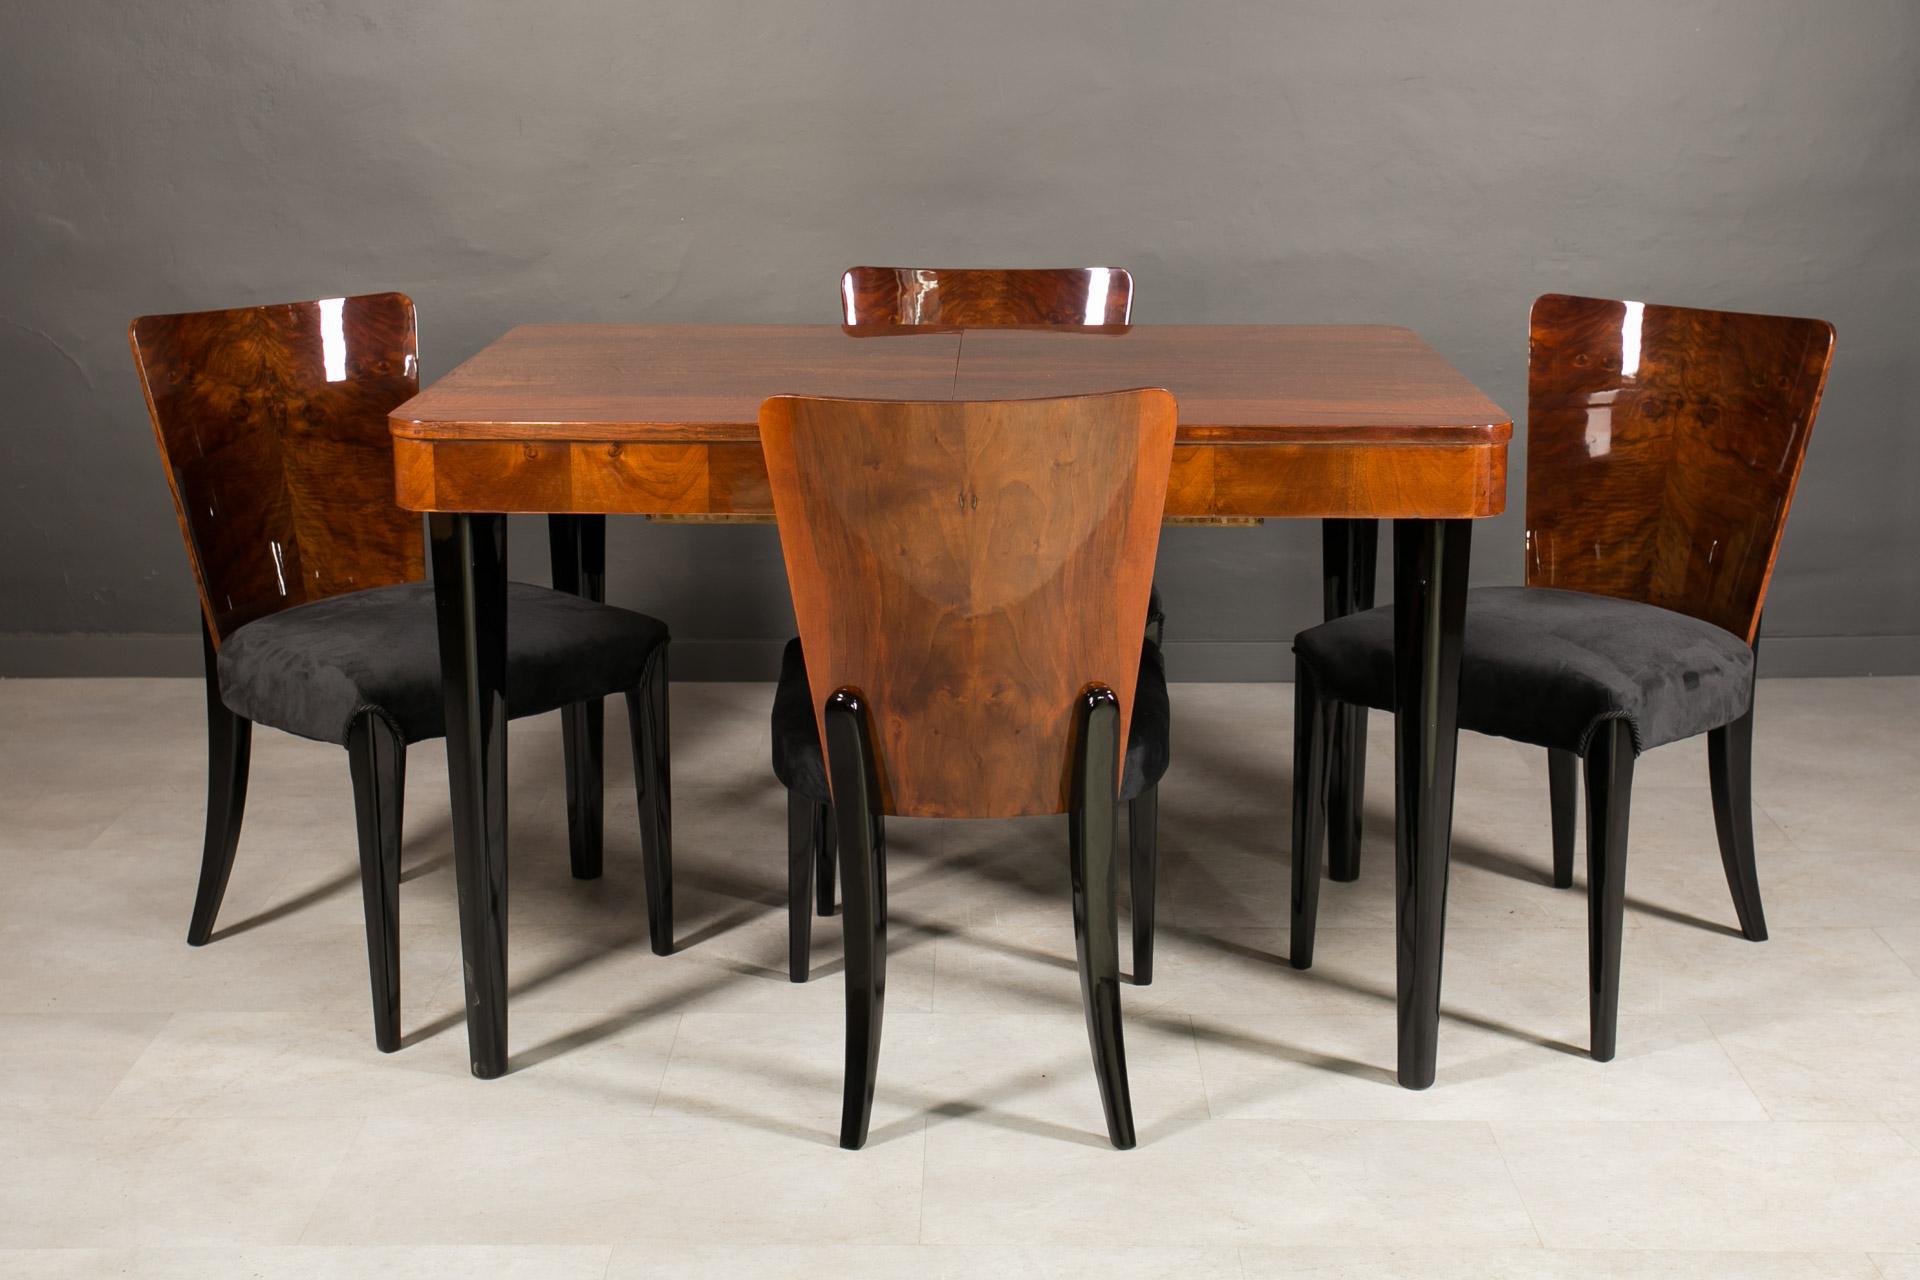 Beautiful Art Deco dining set originally designed by Jindrich Halabala in 1940s produced by Up Zavody - this dining set has since become an icon of classic Jindrich Halabala style and best Czech Design. This gorgeous dining set features an